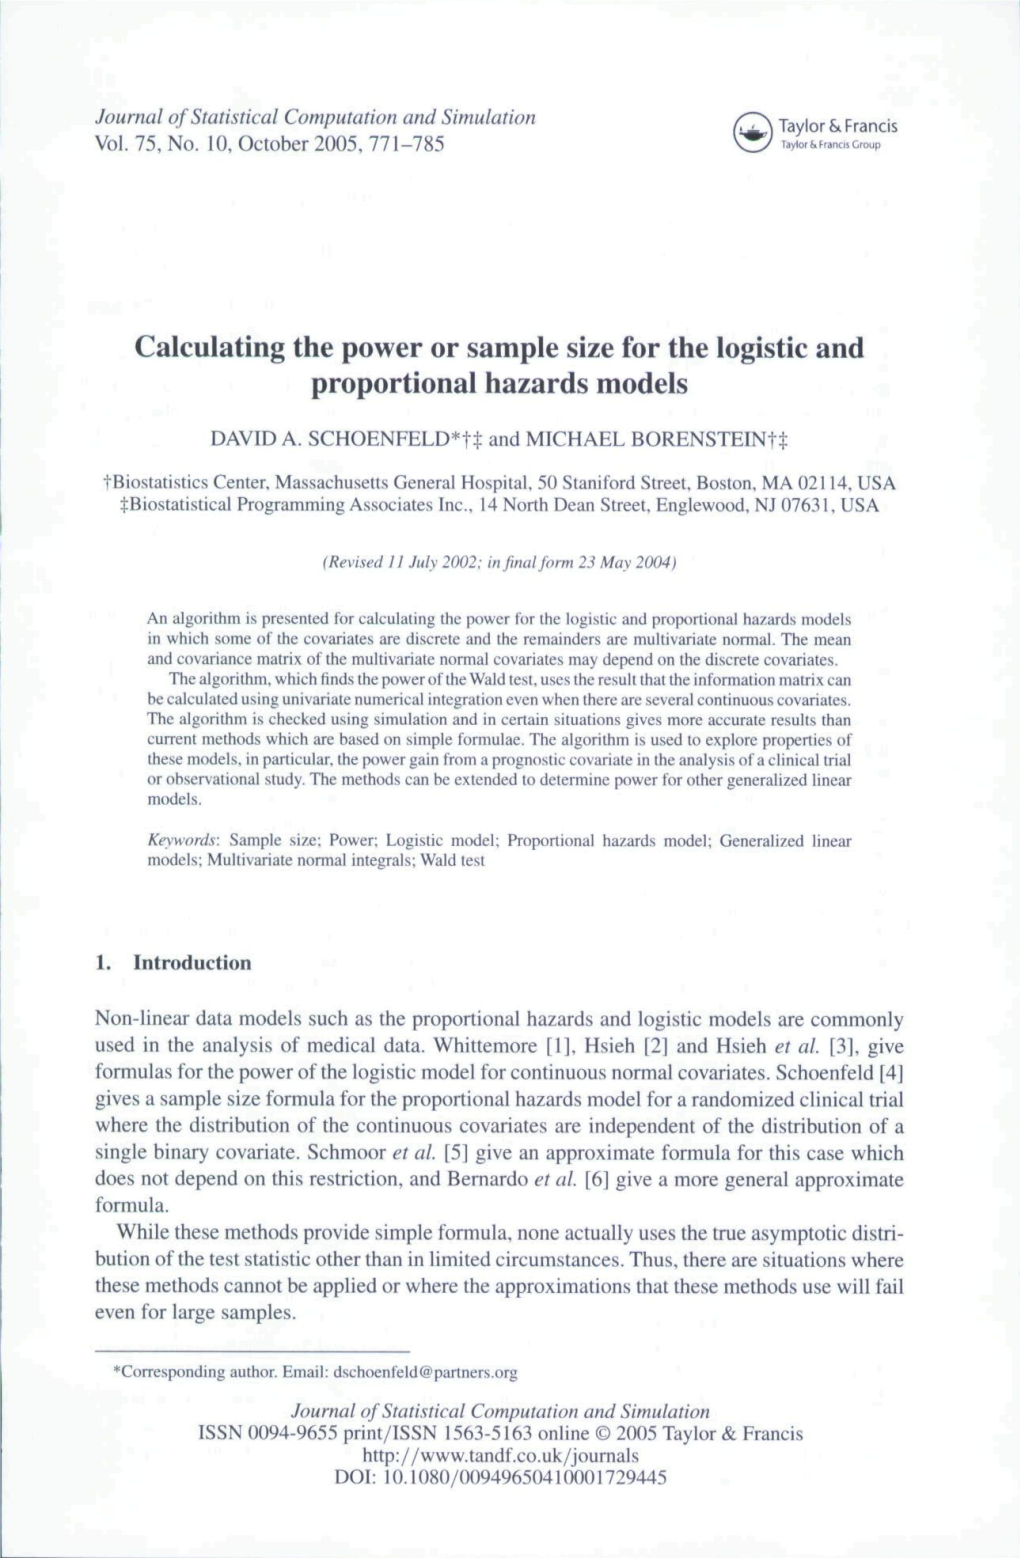 Calculating the Power Or Sample Size for the Logistic and Proportional Hazards Models